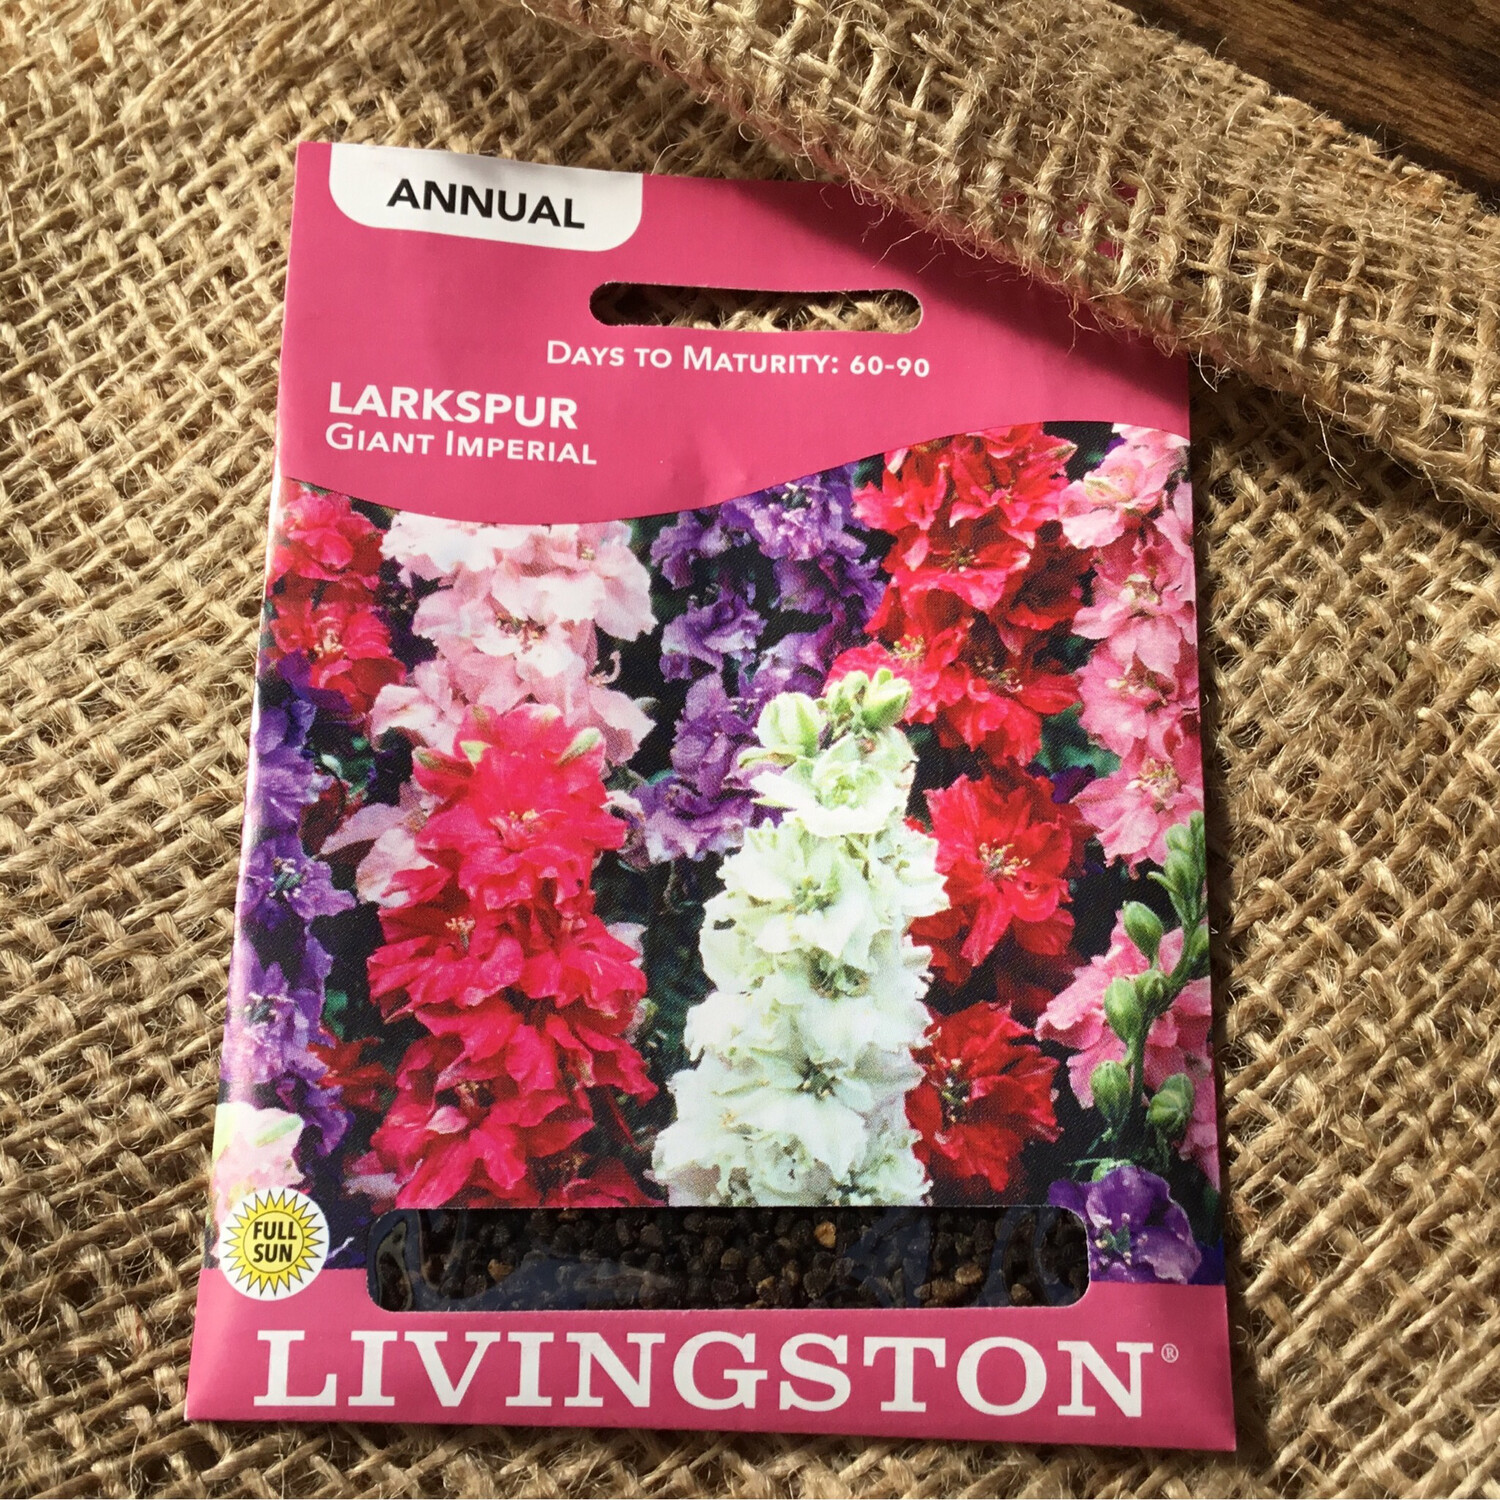 (Seed) Larkspur Giant Imperial $2.99